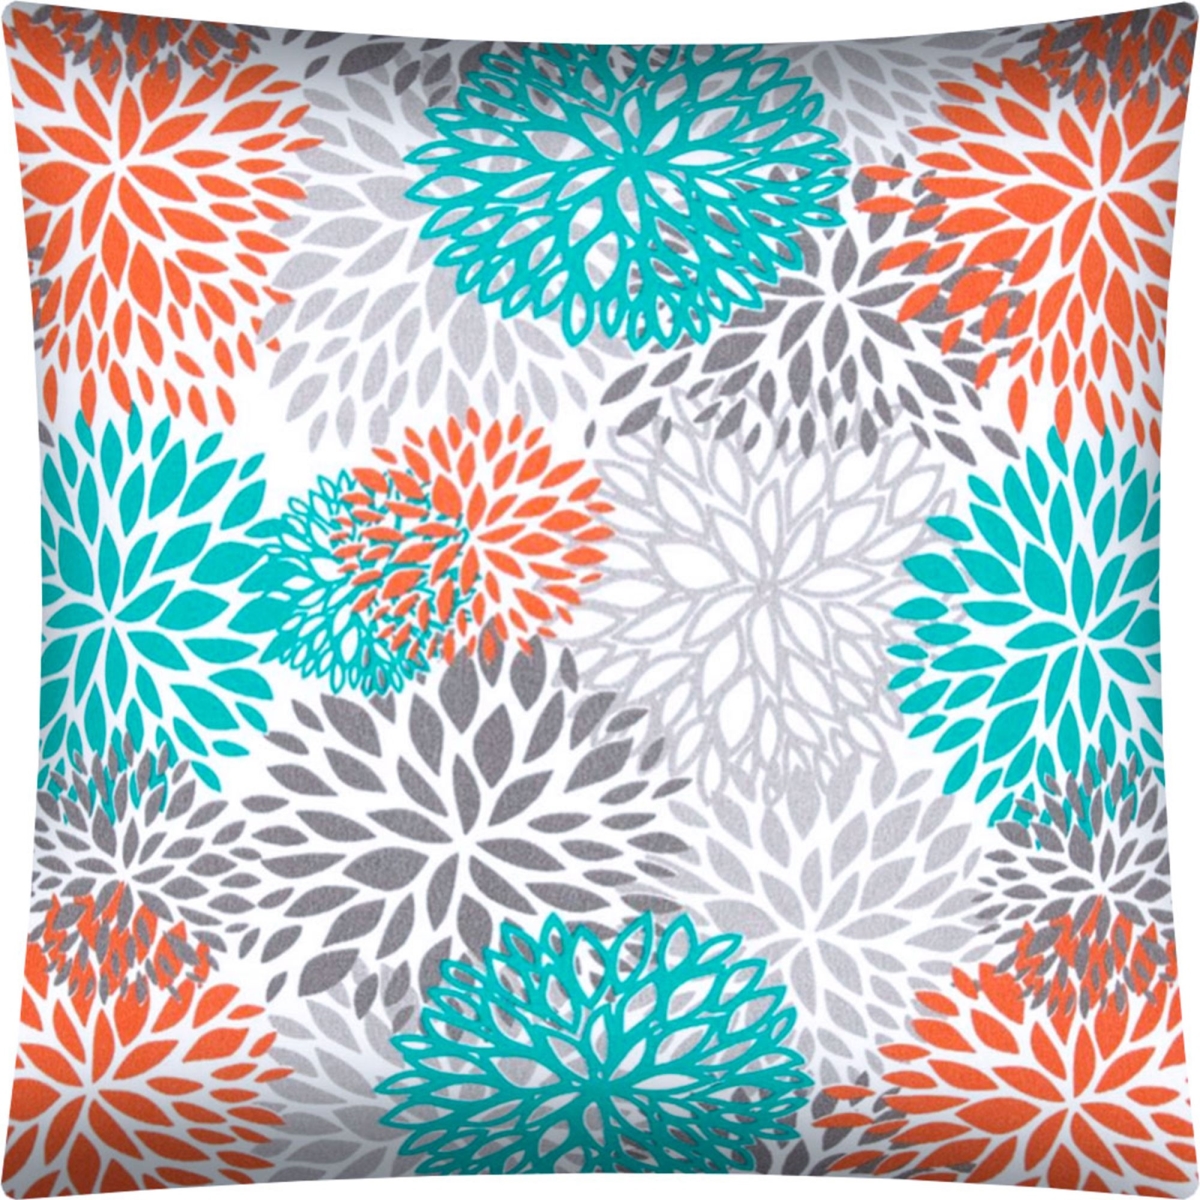 Picture of HomeRoots 472289 17 x 17 in. Orange Teal & White Zippered Polyester Floral Throw Pillow Cover